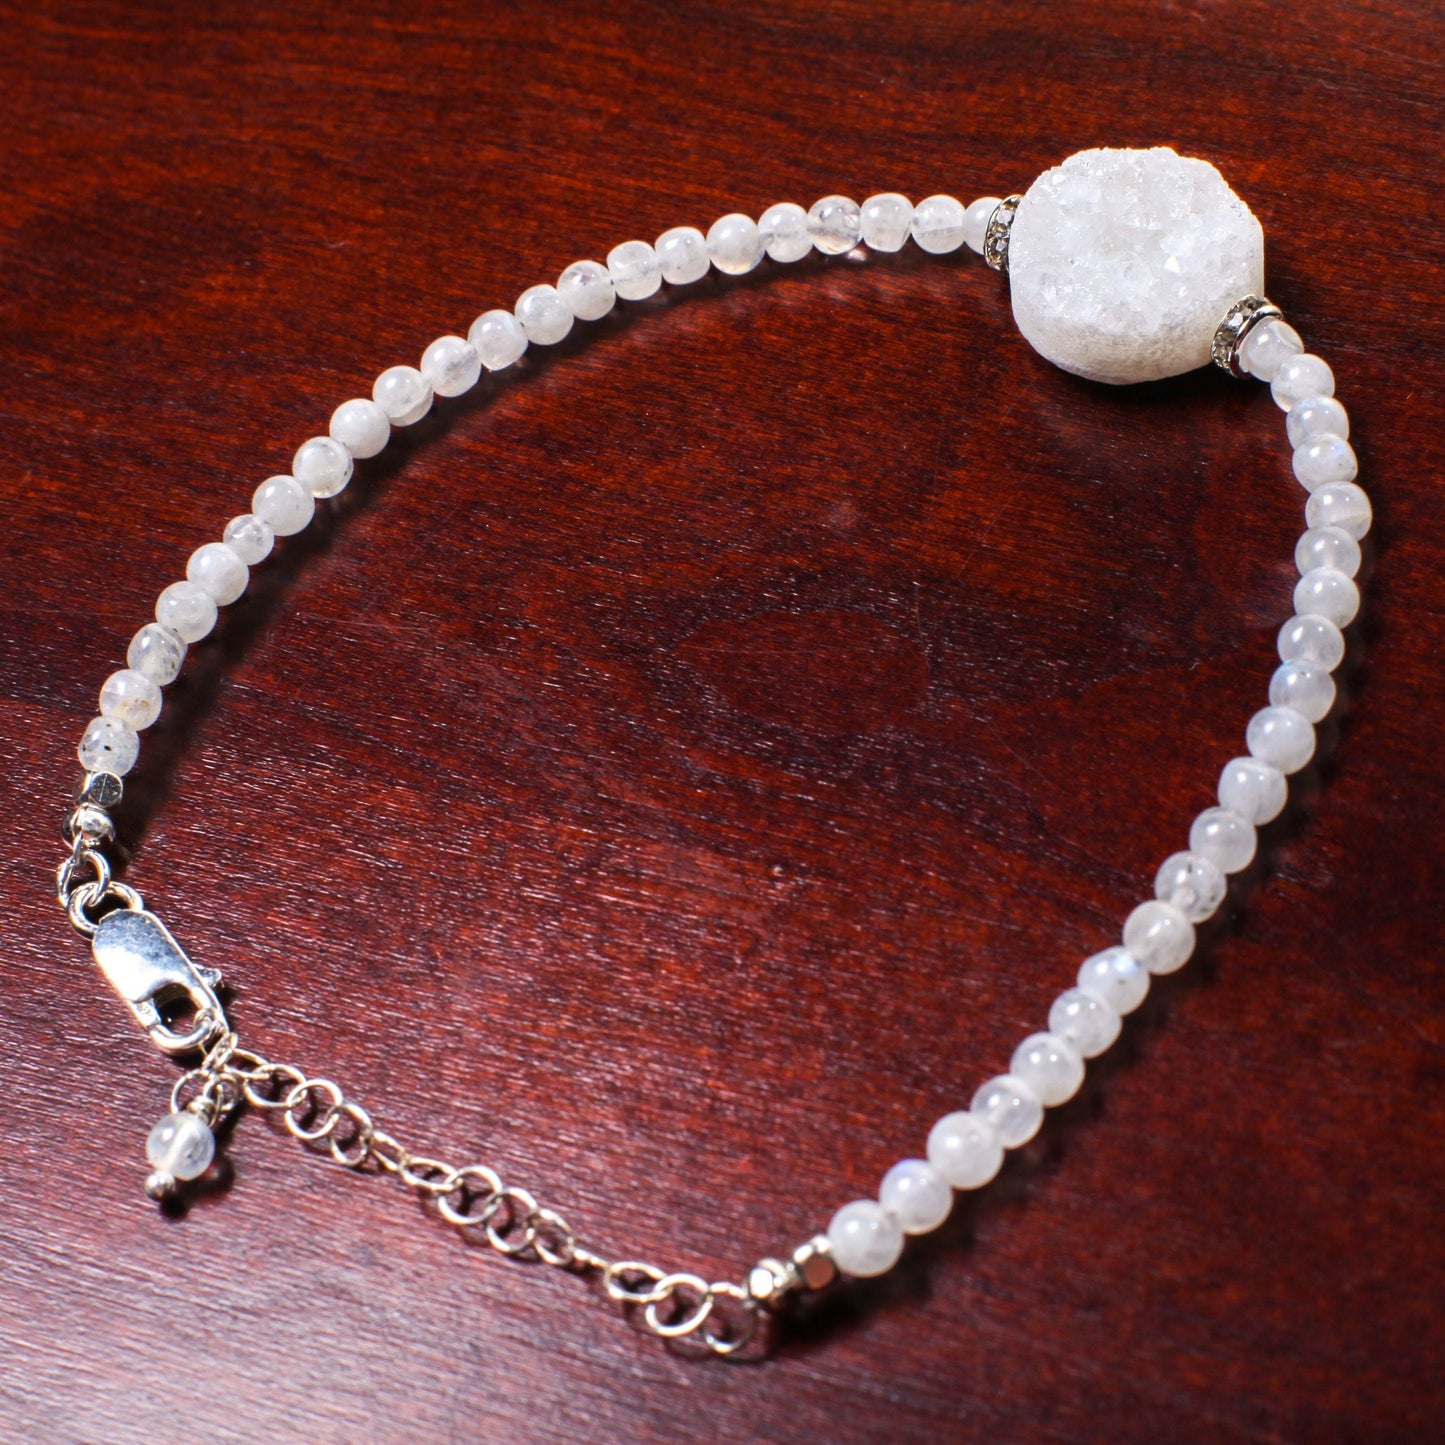 Moonstone smooth round 4mm with natural Geod Drusy white center piece Bracelet in 925 Sterling Silver Chain and Clasp,